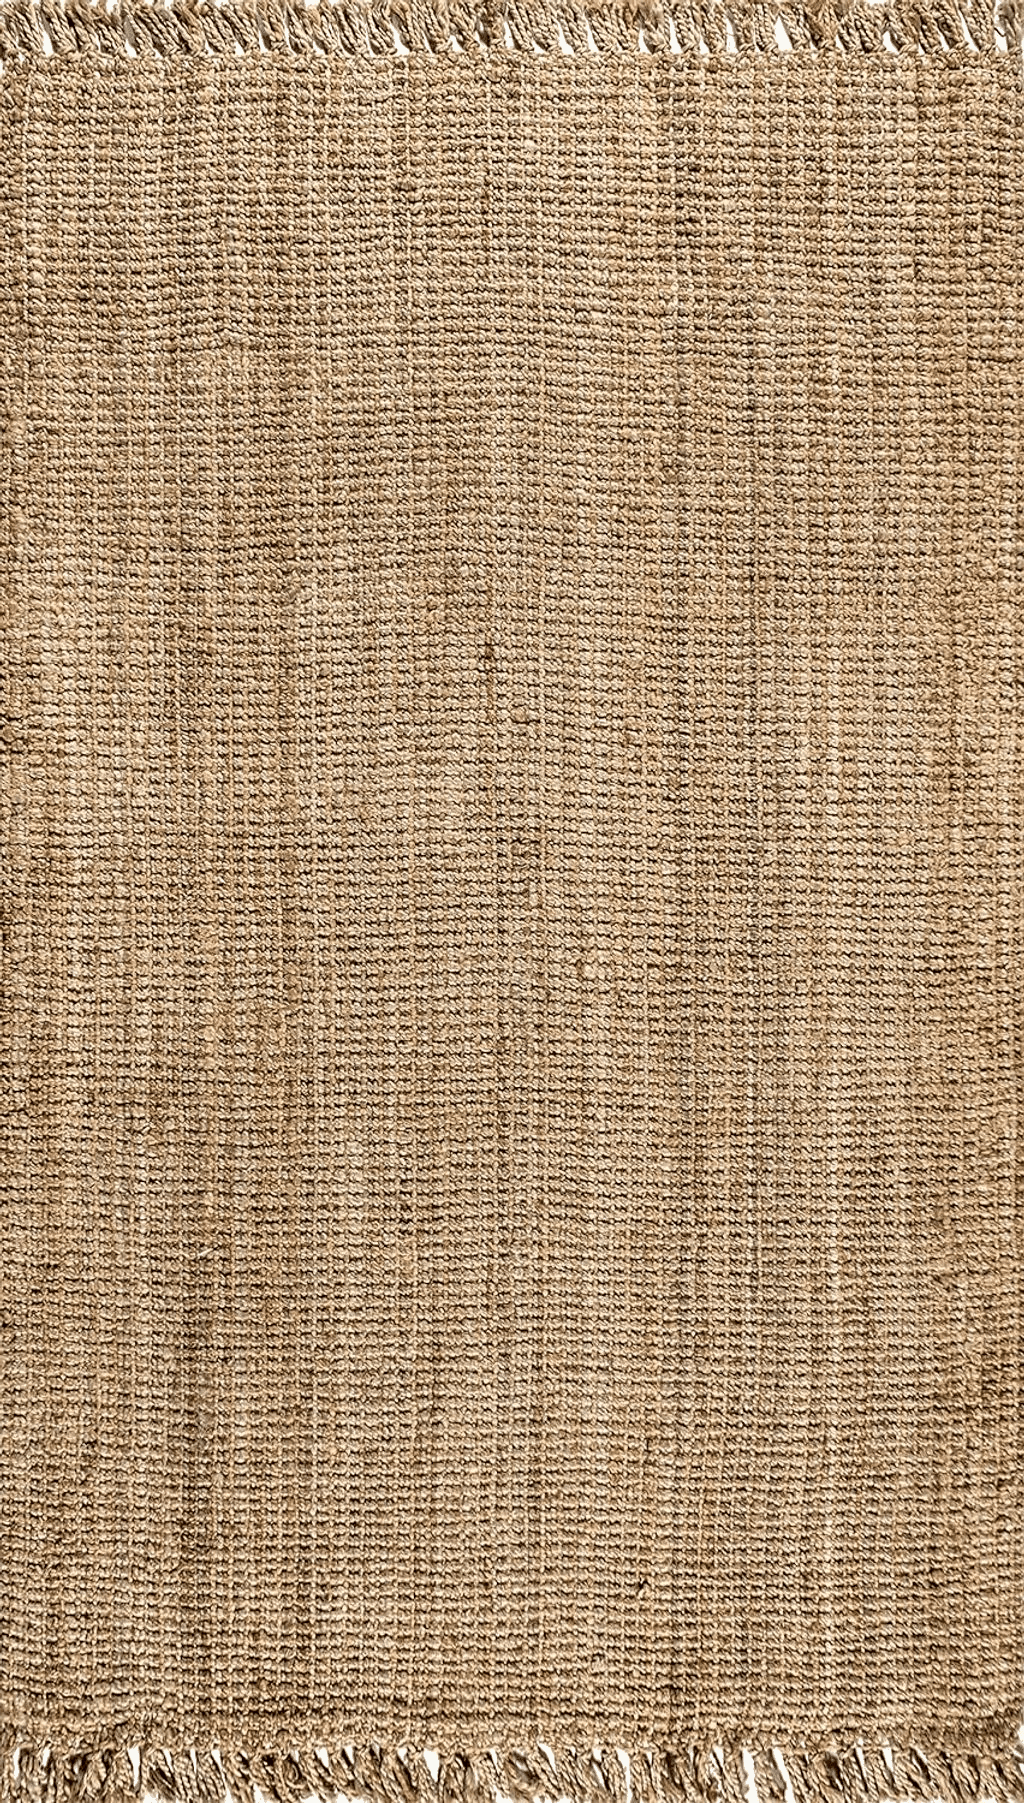 JONATHAN Y NRF103A-5 para Hand Woven Chunky Jute with Fringe Area-Rug, Bohemian, for Bedroom, Kitchen, Living Room,5 X 8,Natural